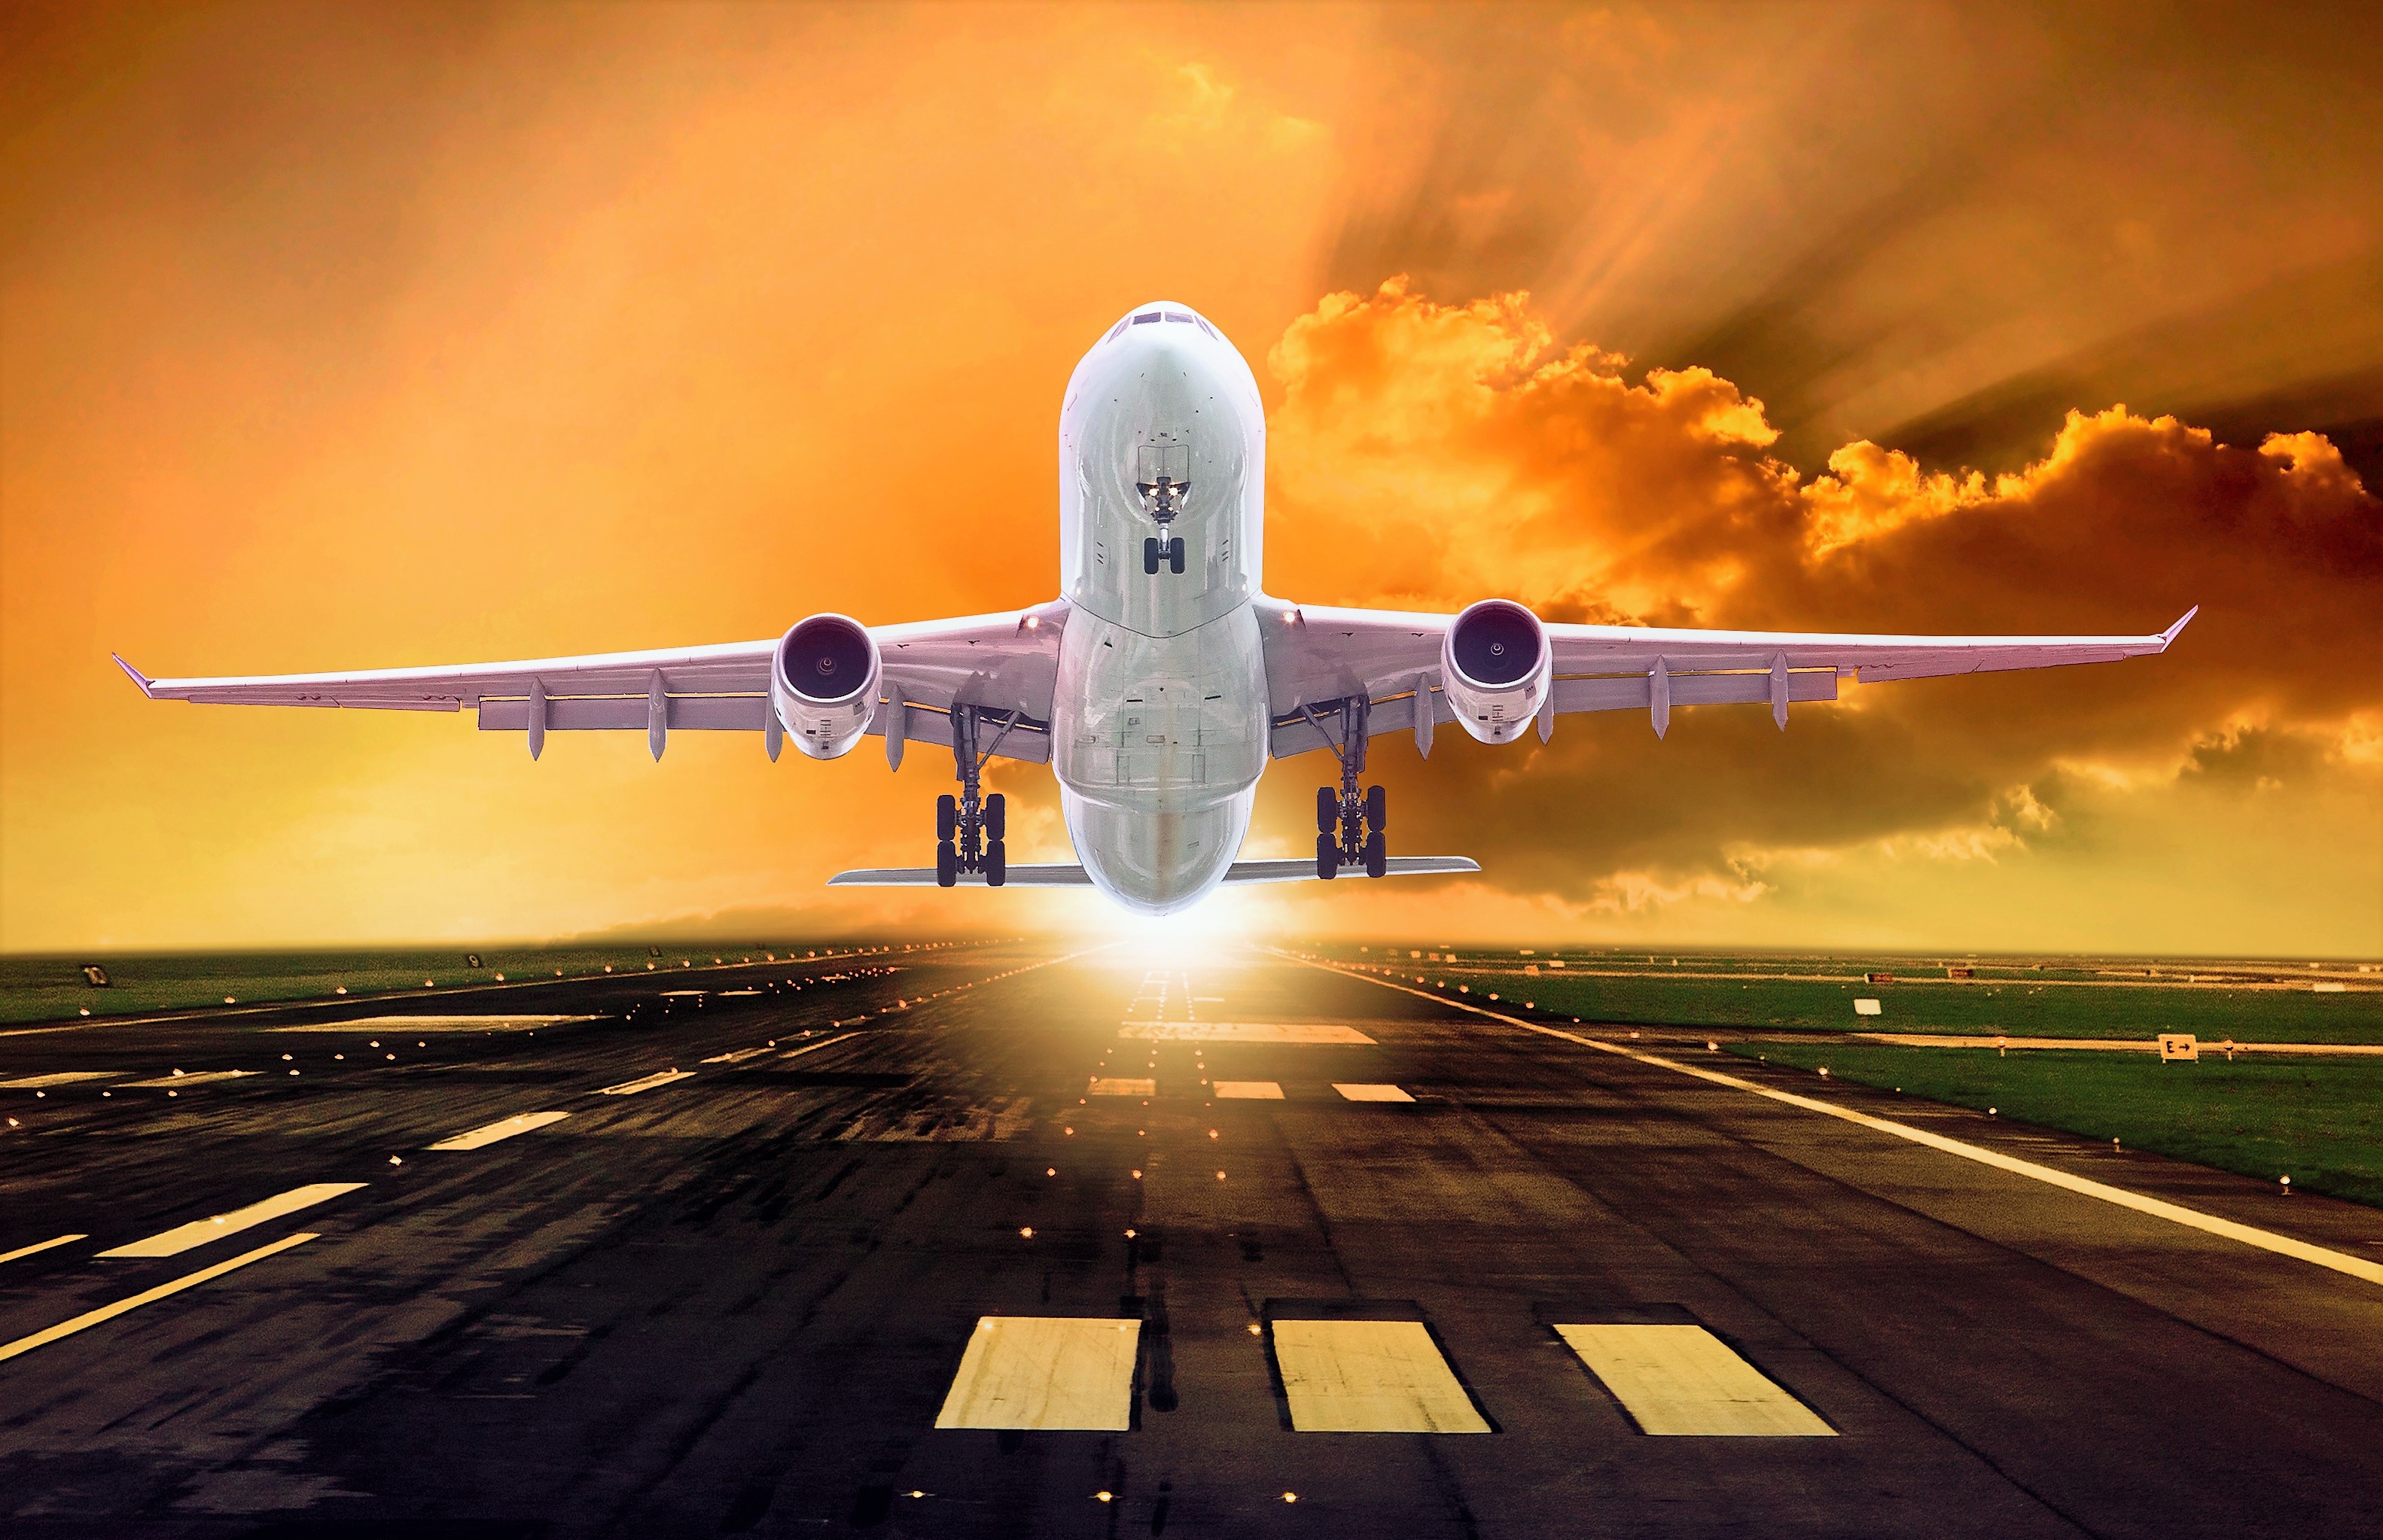 Plane Taking Off At Sunset HD Wallpaper Background Image